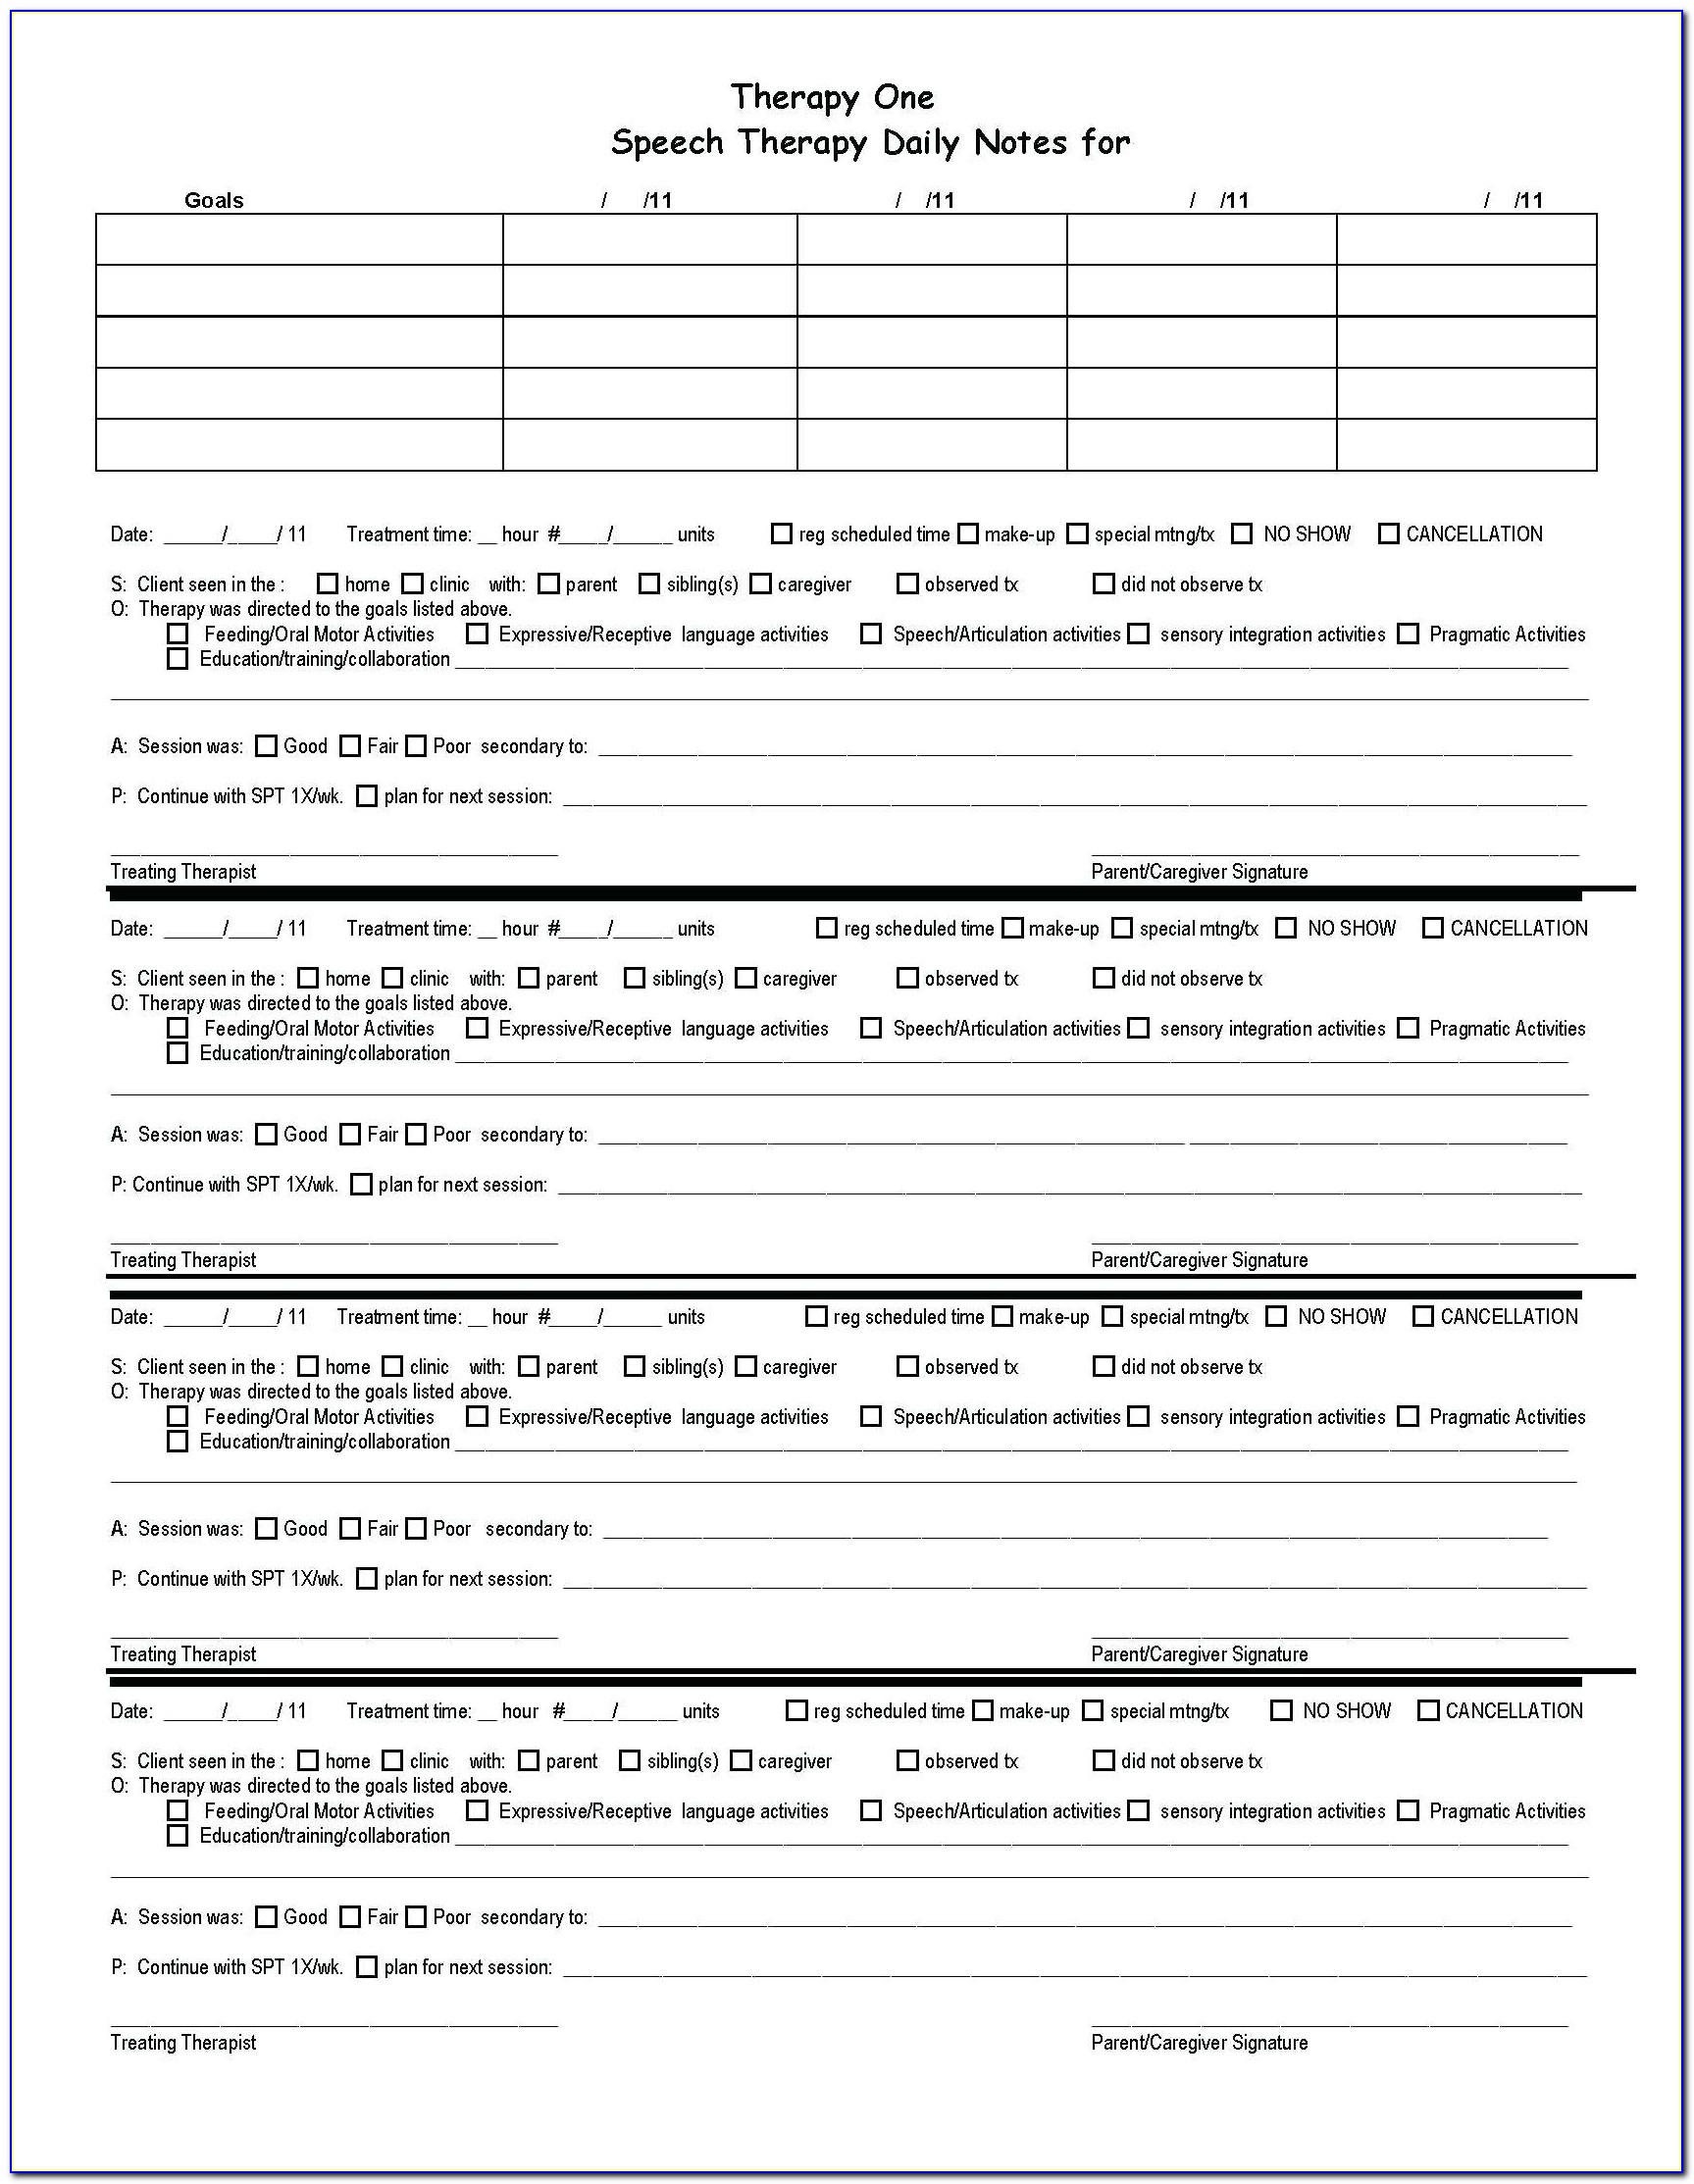 acupuncture-soap-notes-format-form-resume-examples-b8dvmyvkmb